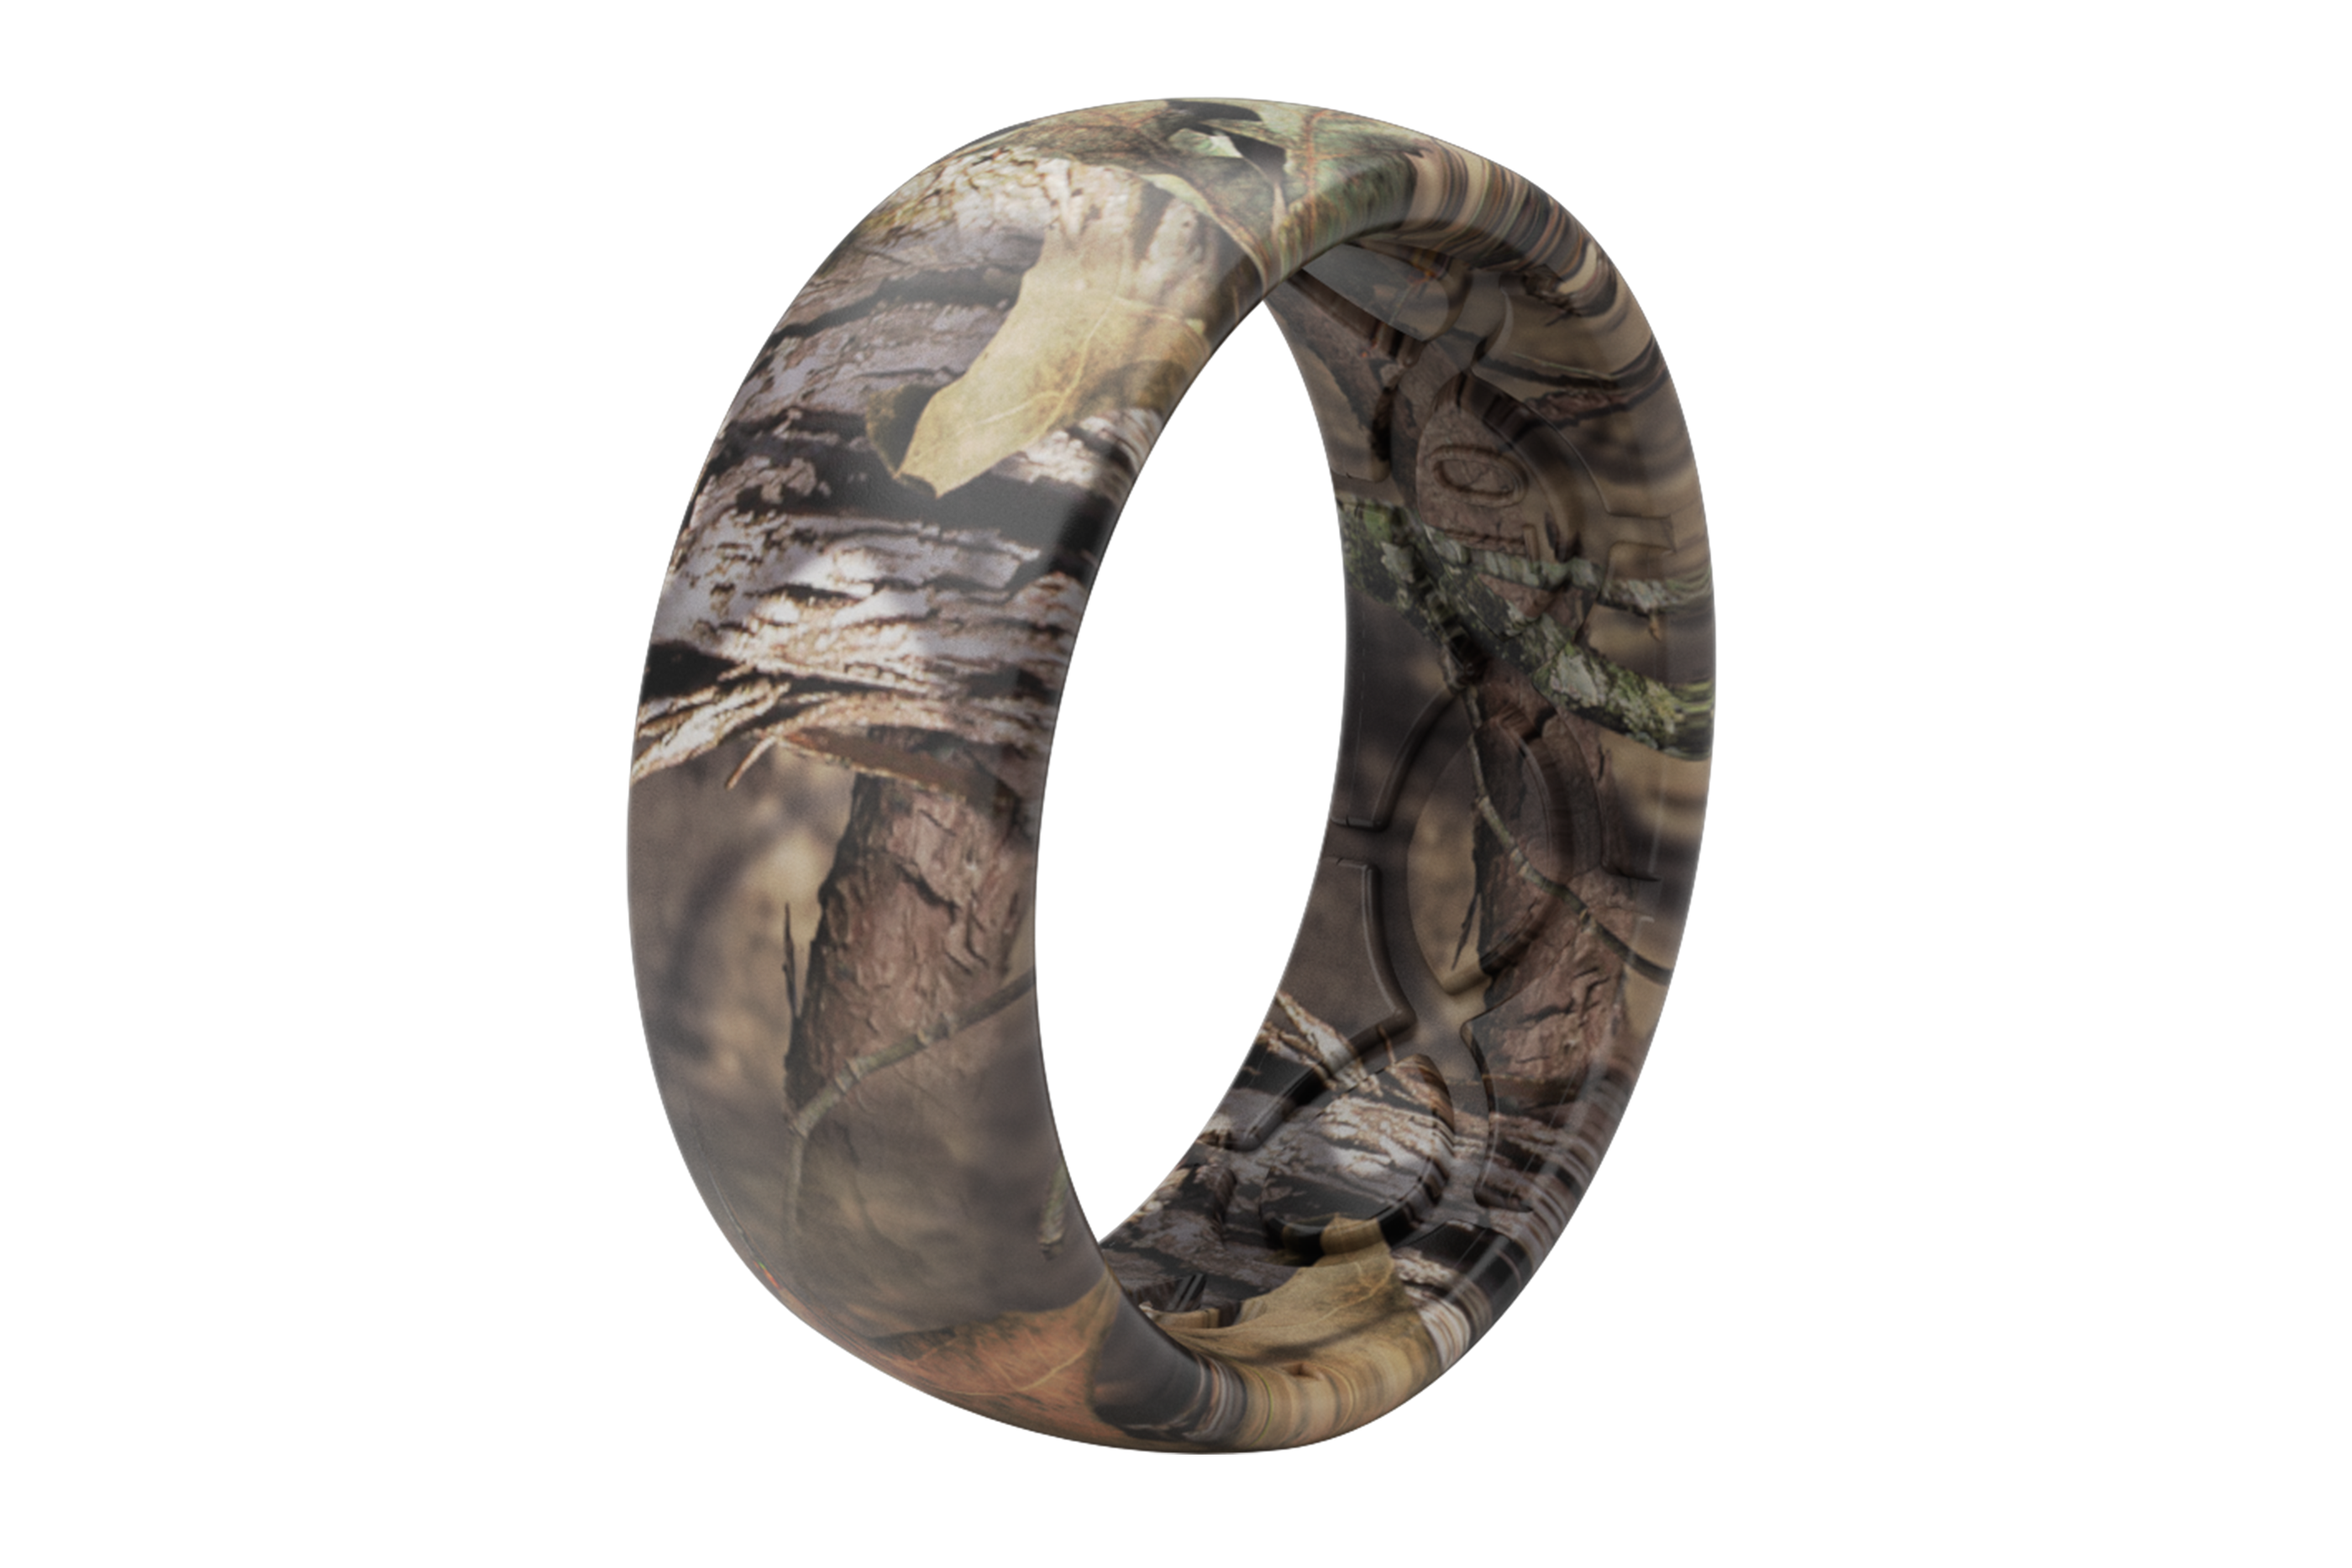 New Mossy Oak Silicone Wedding Bands from Groove Rings